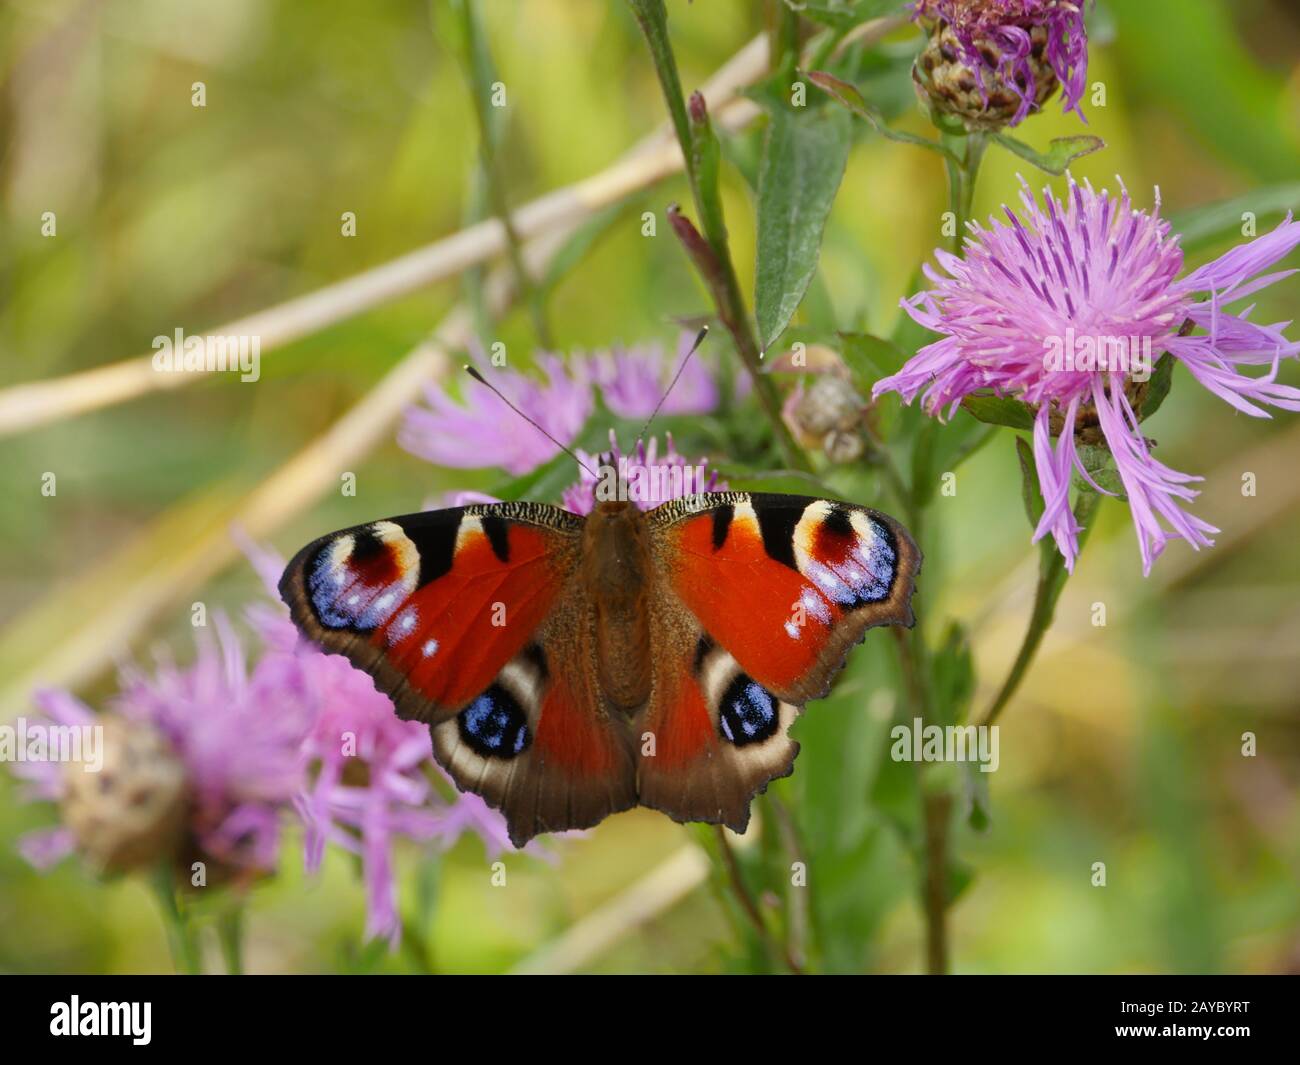 butterfly peacock eye with beautiful wings Stock Photo